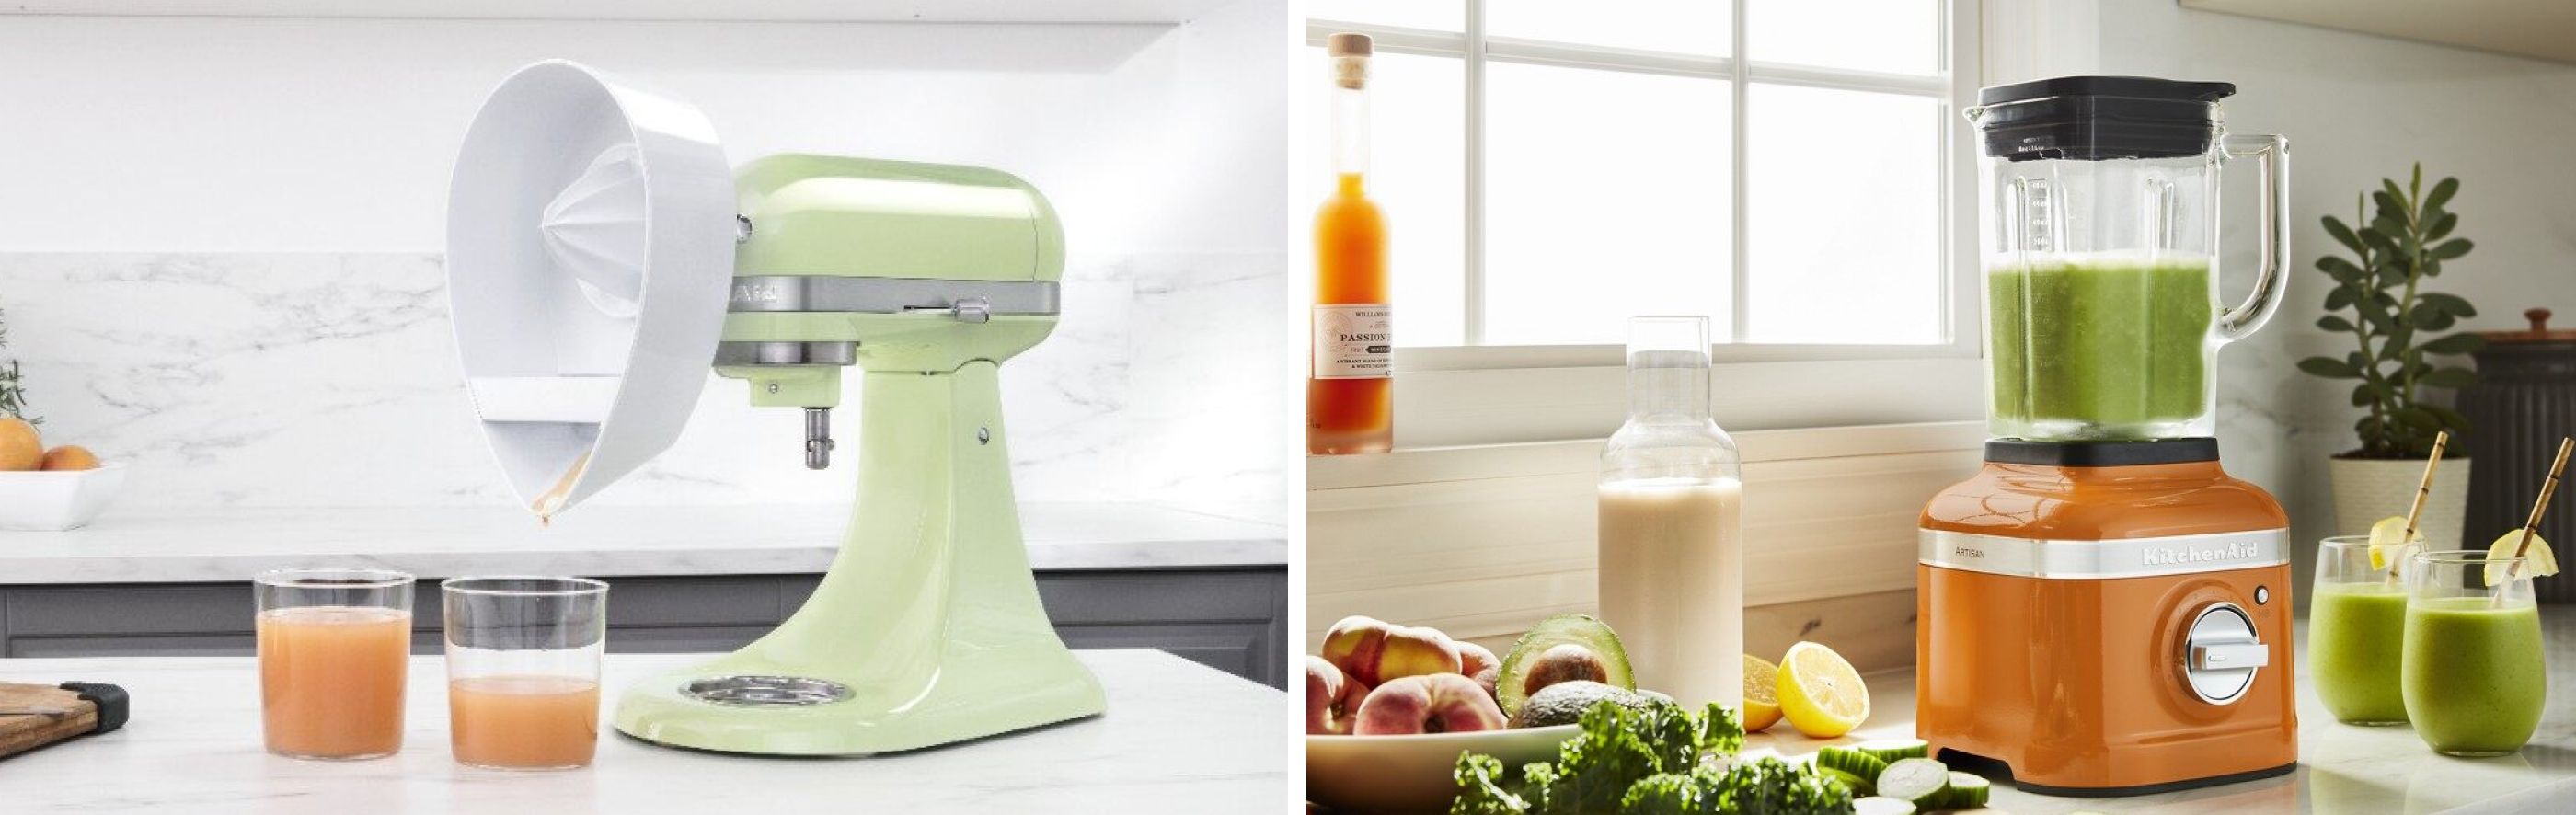 hunt allocation Importance Juicer vs. Blender: What's the Difference? | KitchenAid